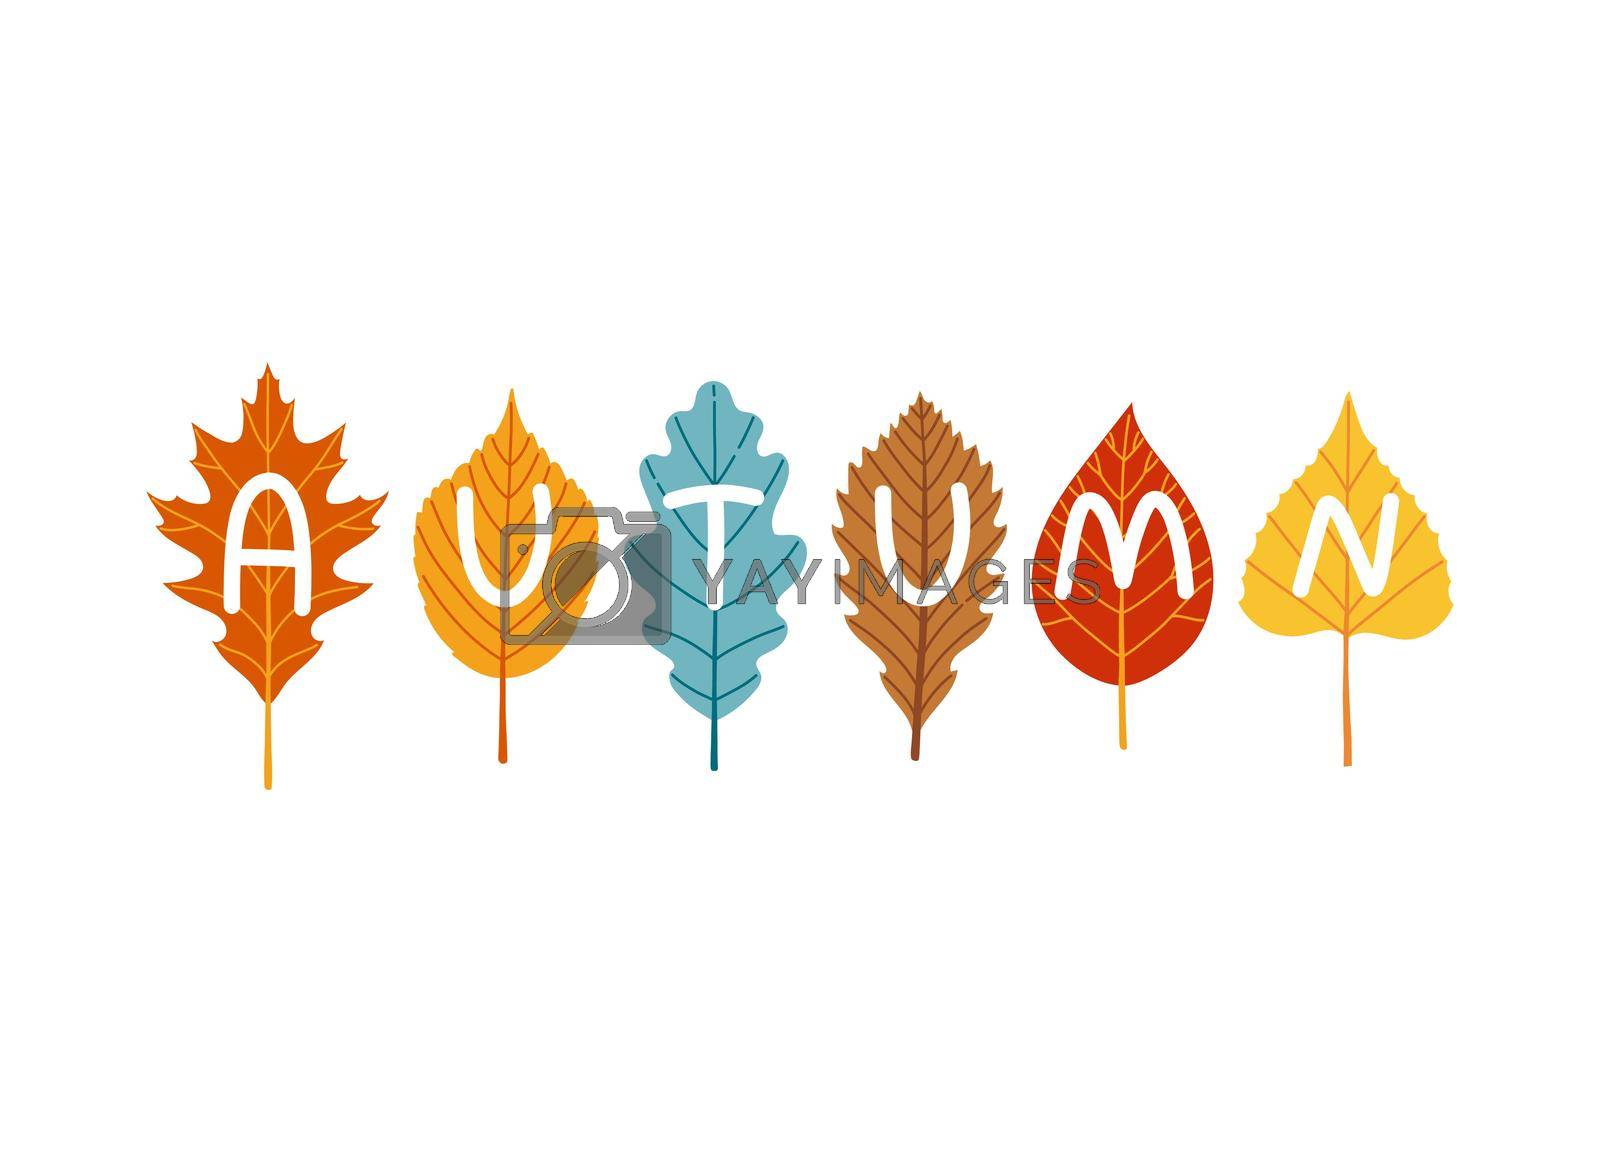 Royalty free image of Autumn lettering on leaves fall season vector by spirkaart